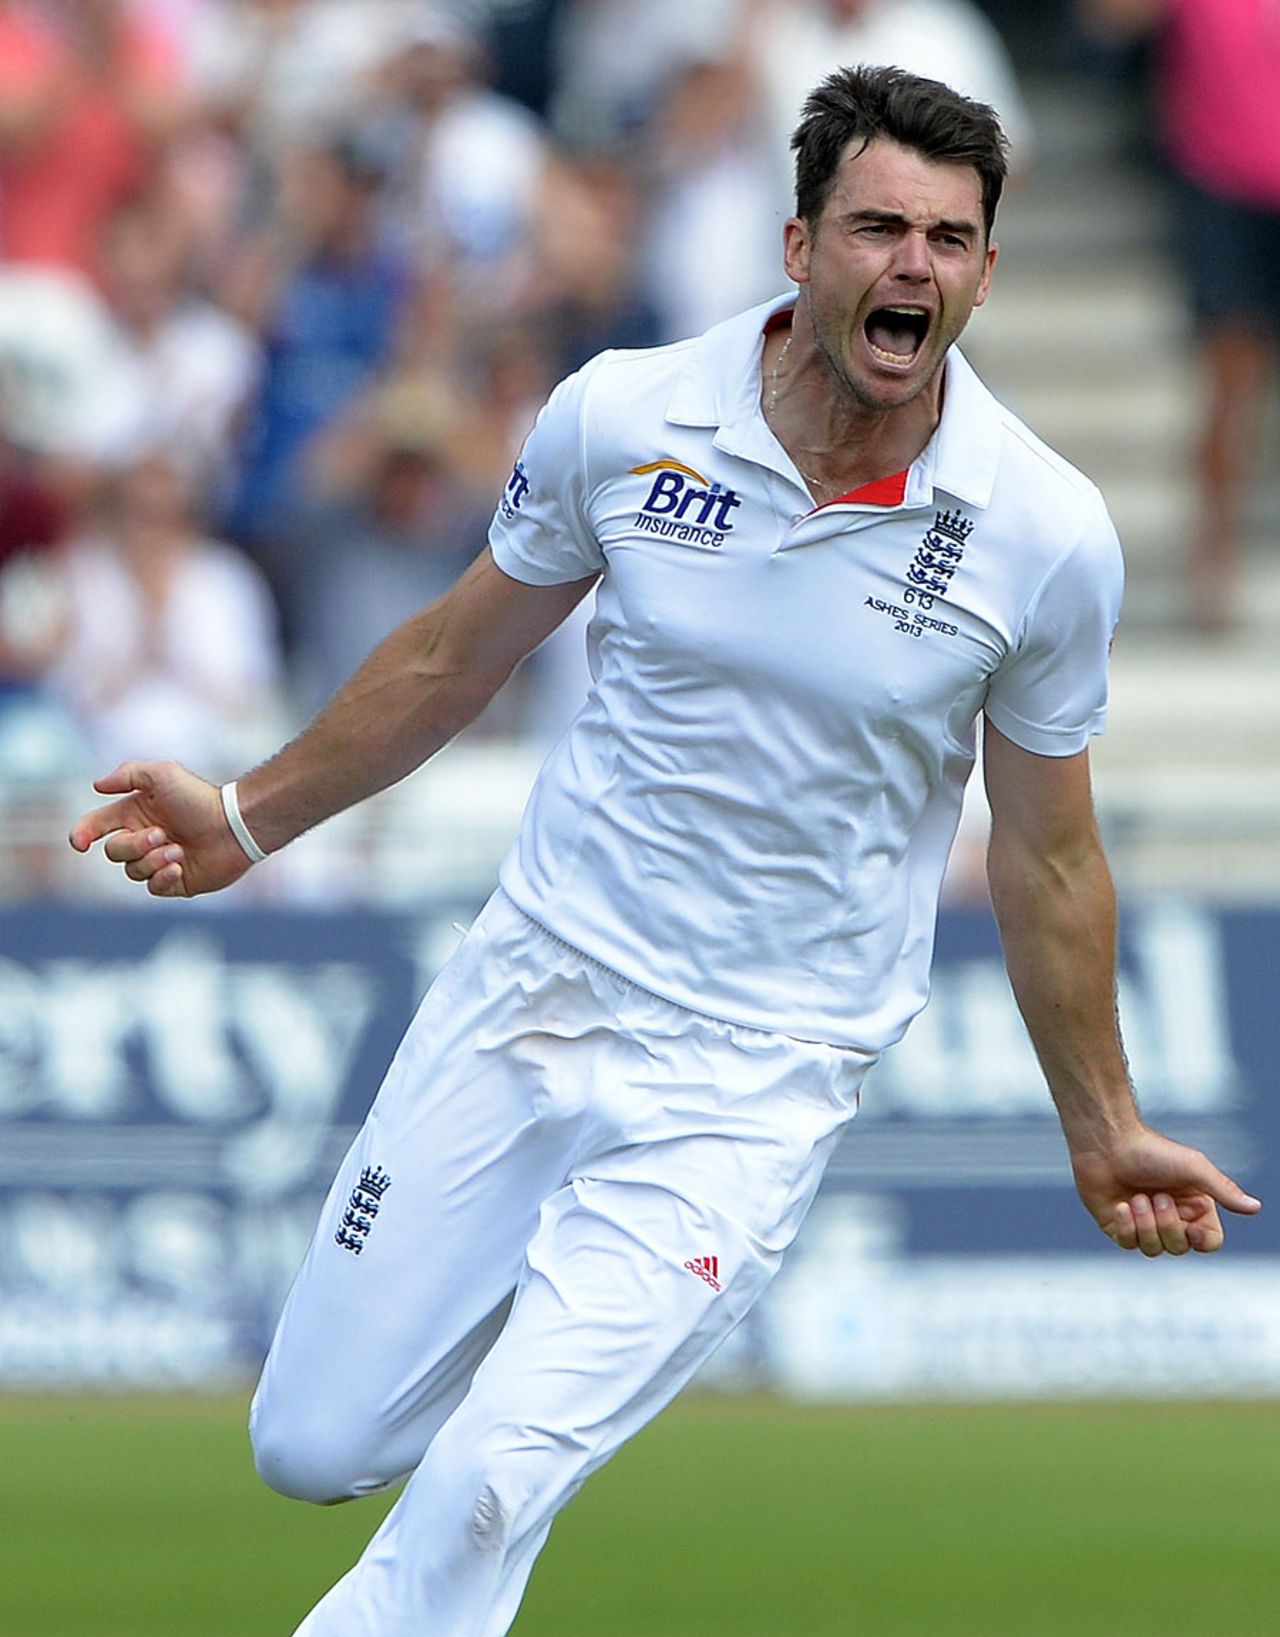 James Anderson made two quick breakthroughs for England, England v Australia, 1st Investec Test, Trent Bridge, 5th day, July 14, 2013